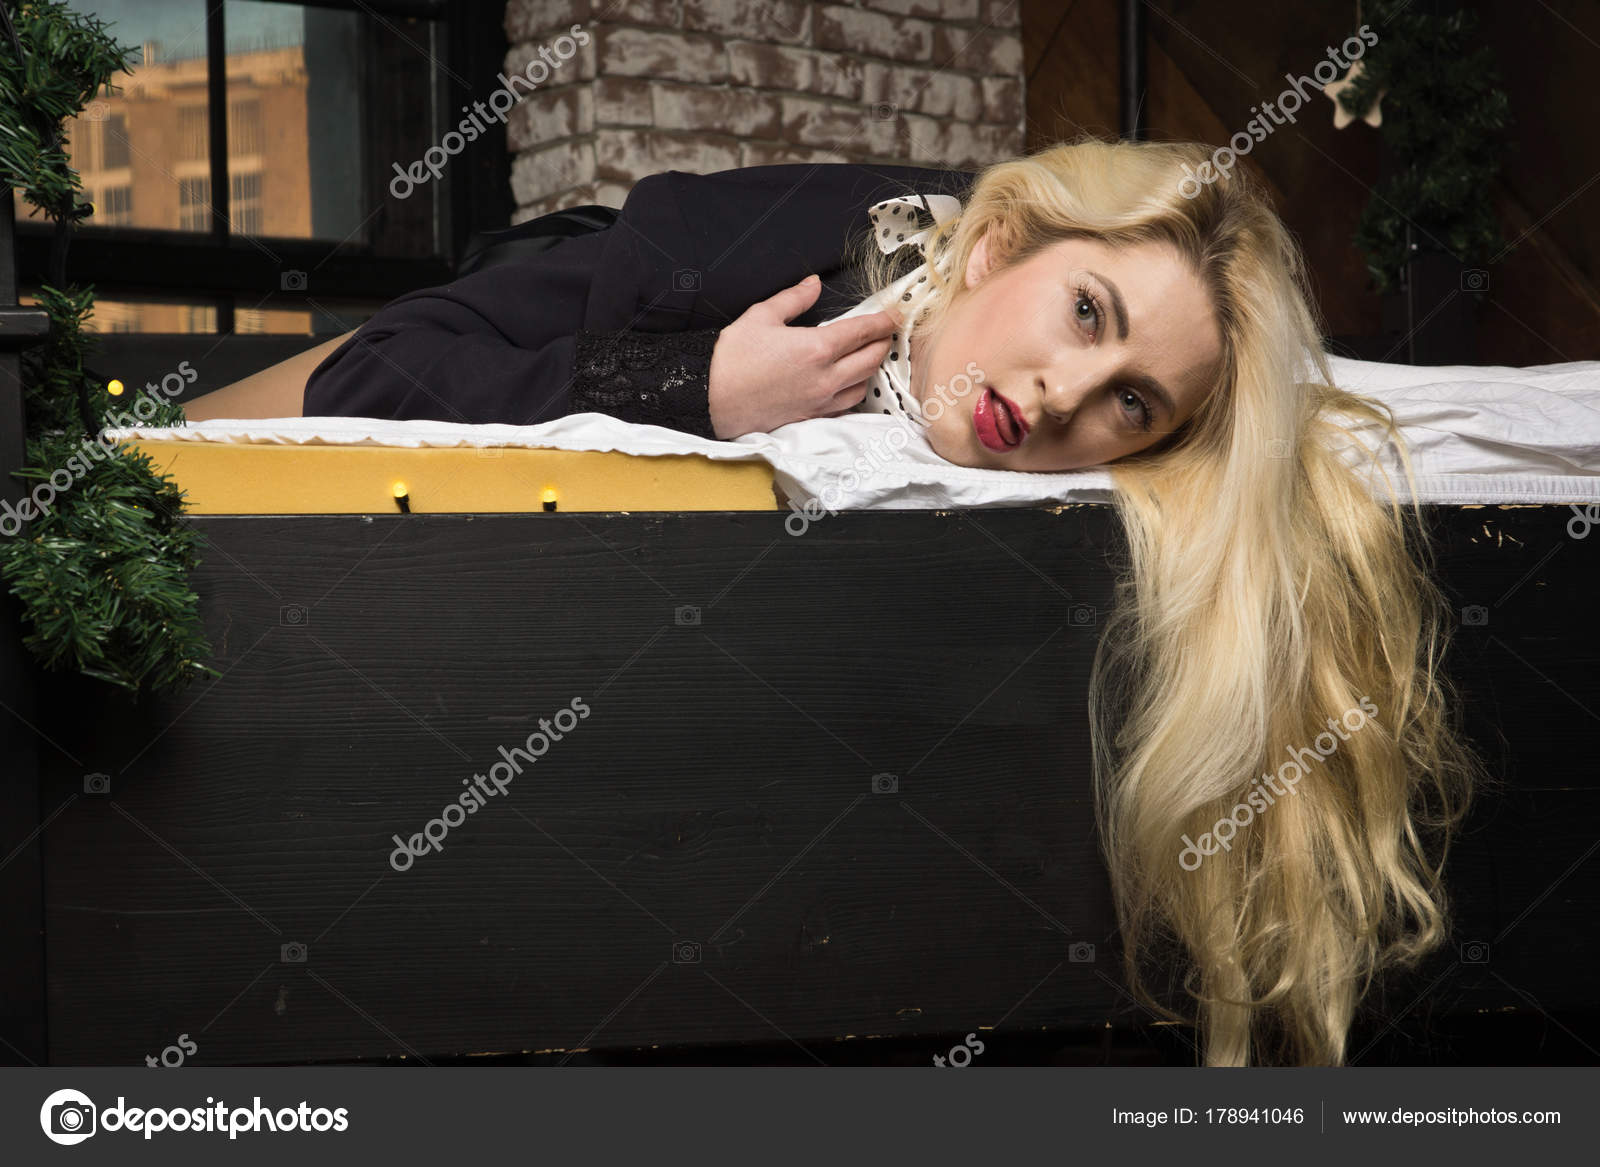 Strangled business woman lying on the bed - Stock Image. 